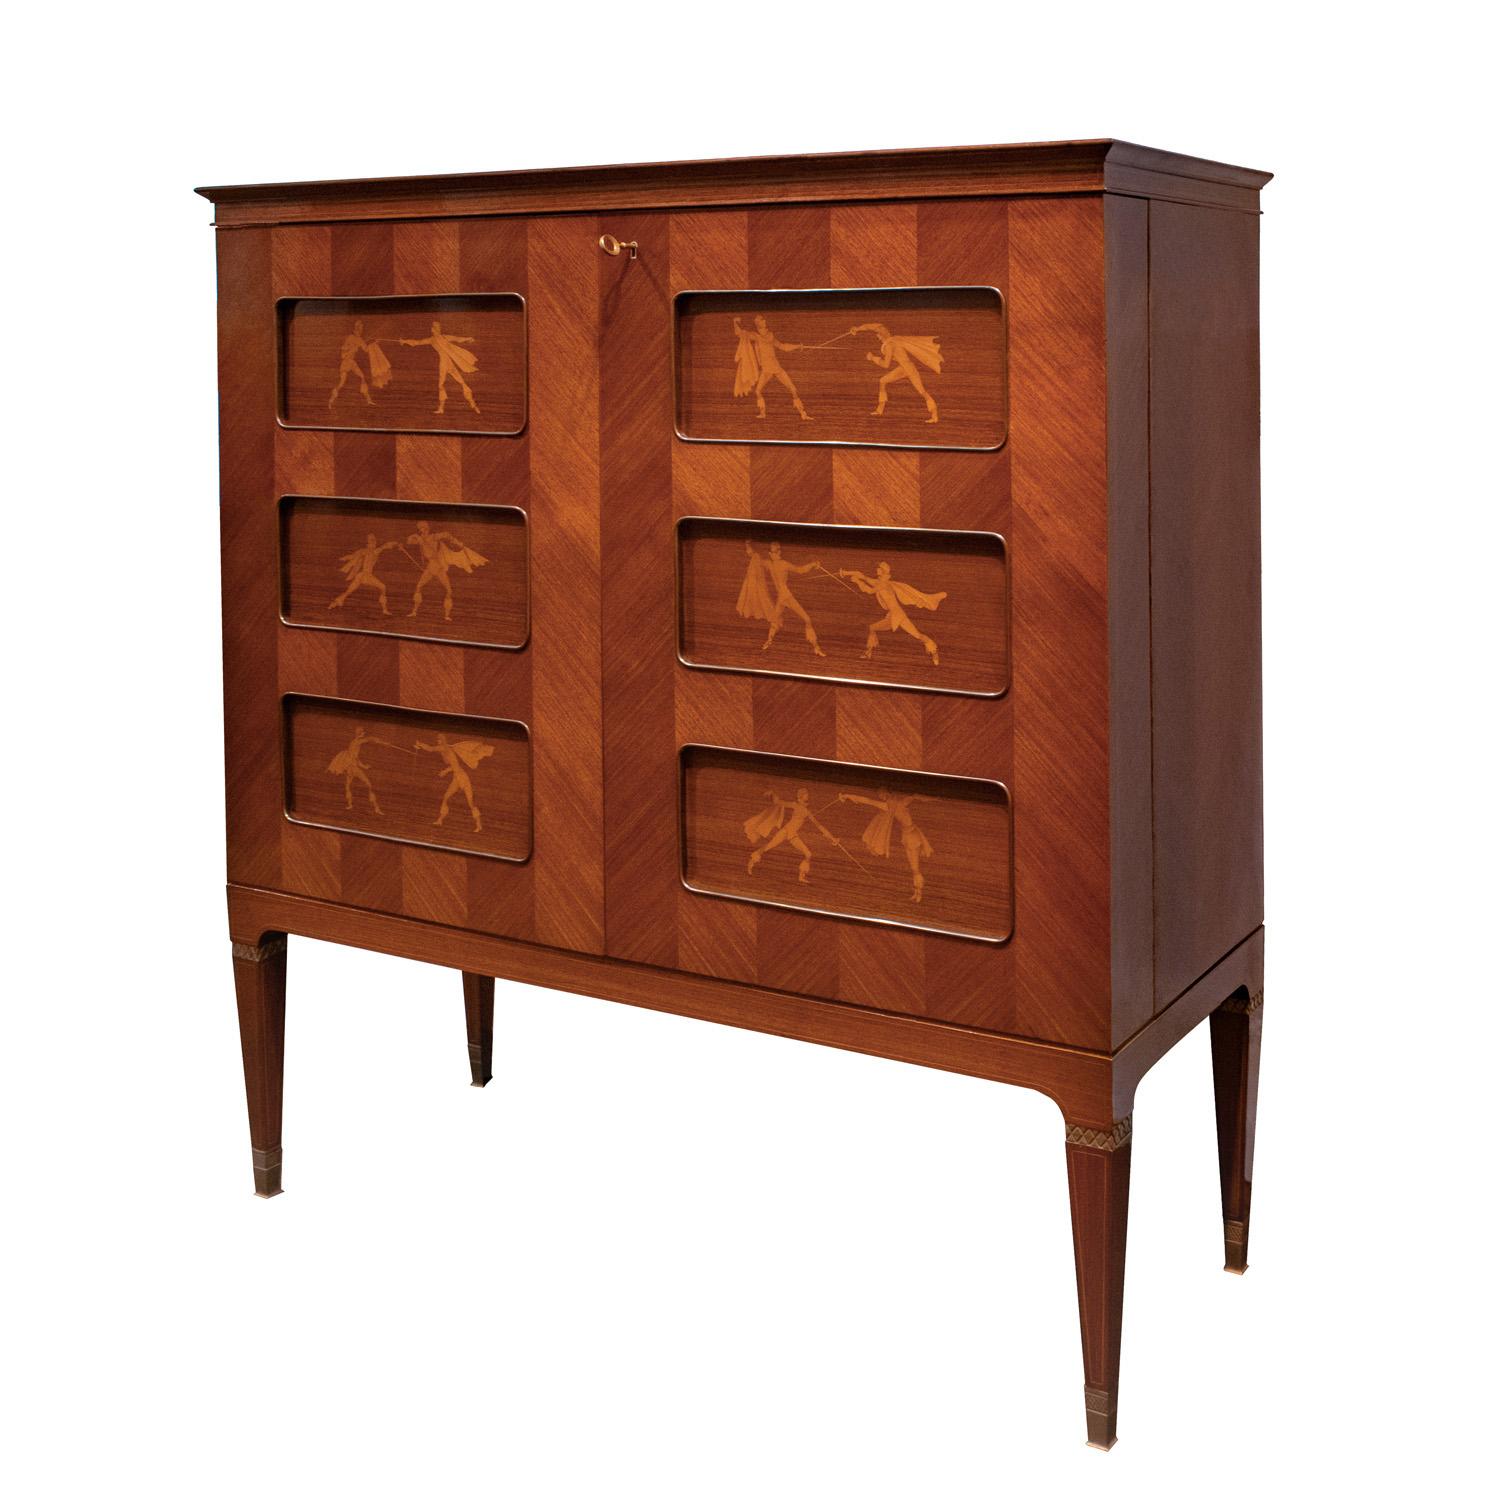 Mid-Century Modern Paolo Buffa Exceptional Liquor Cabinet with Intricate Inlays 1950s For Sale